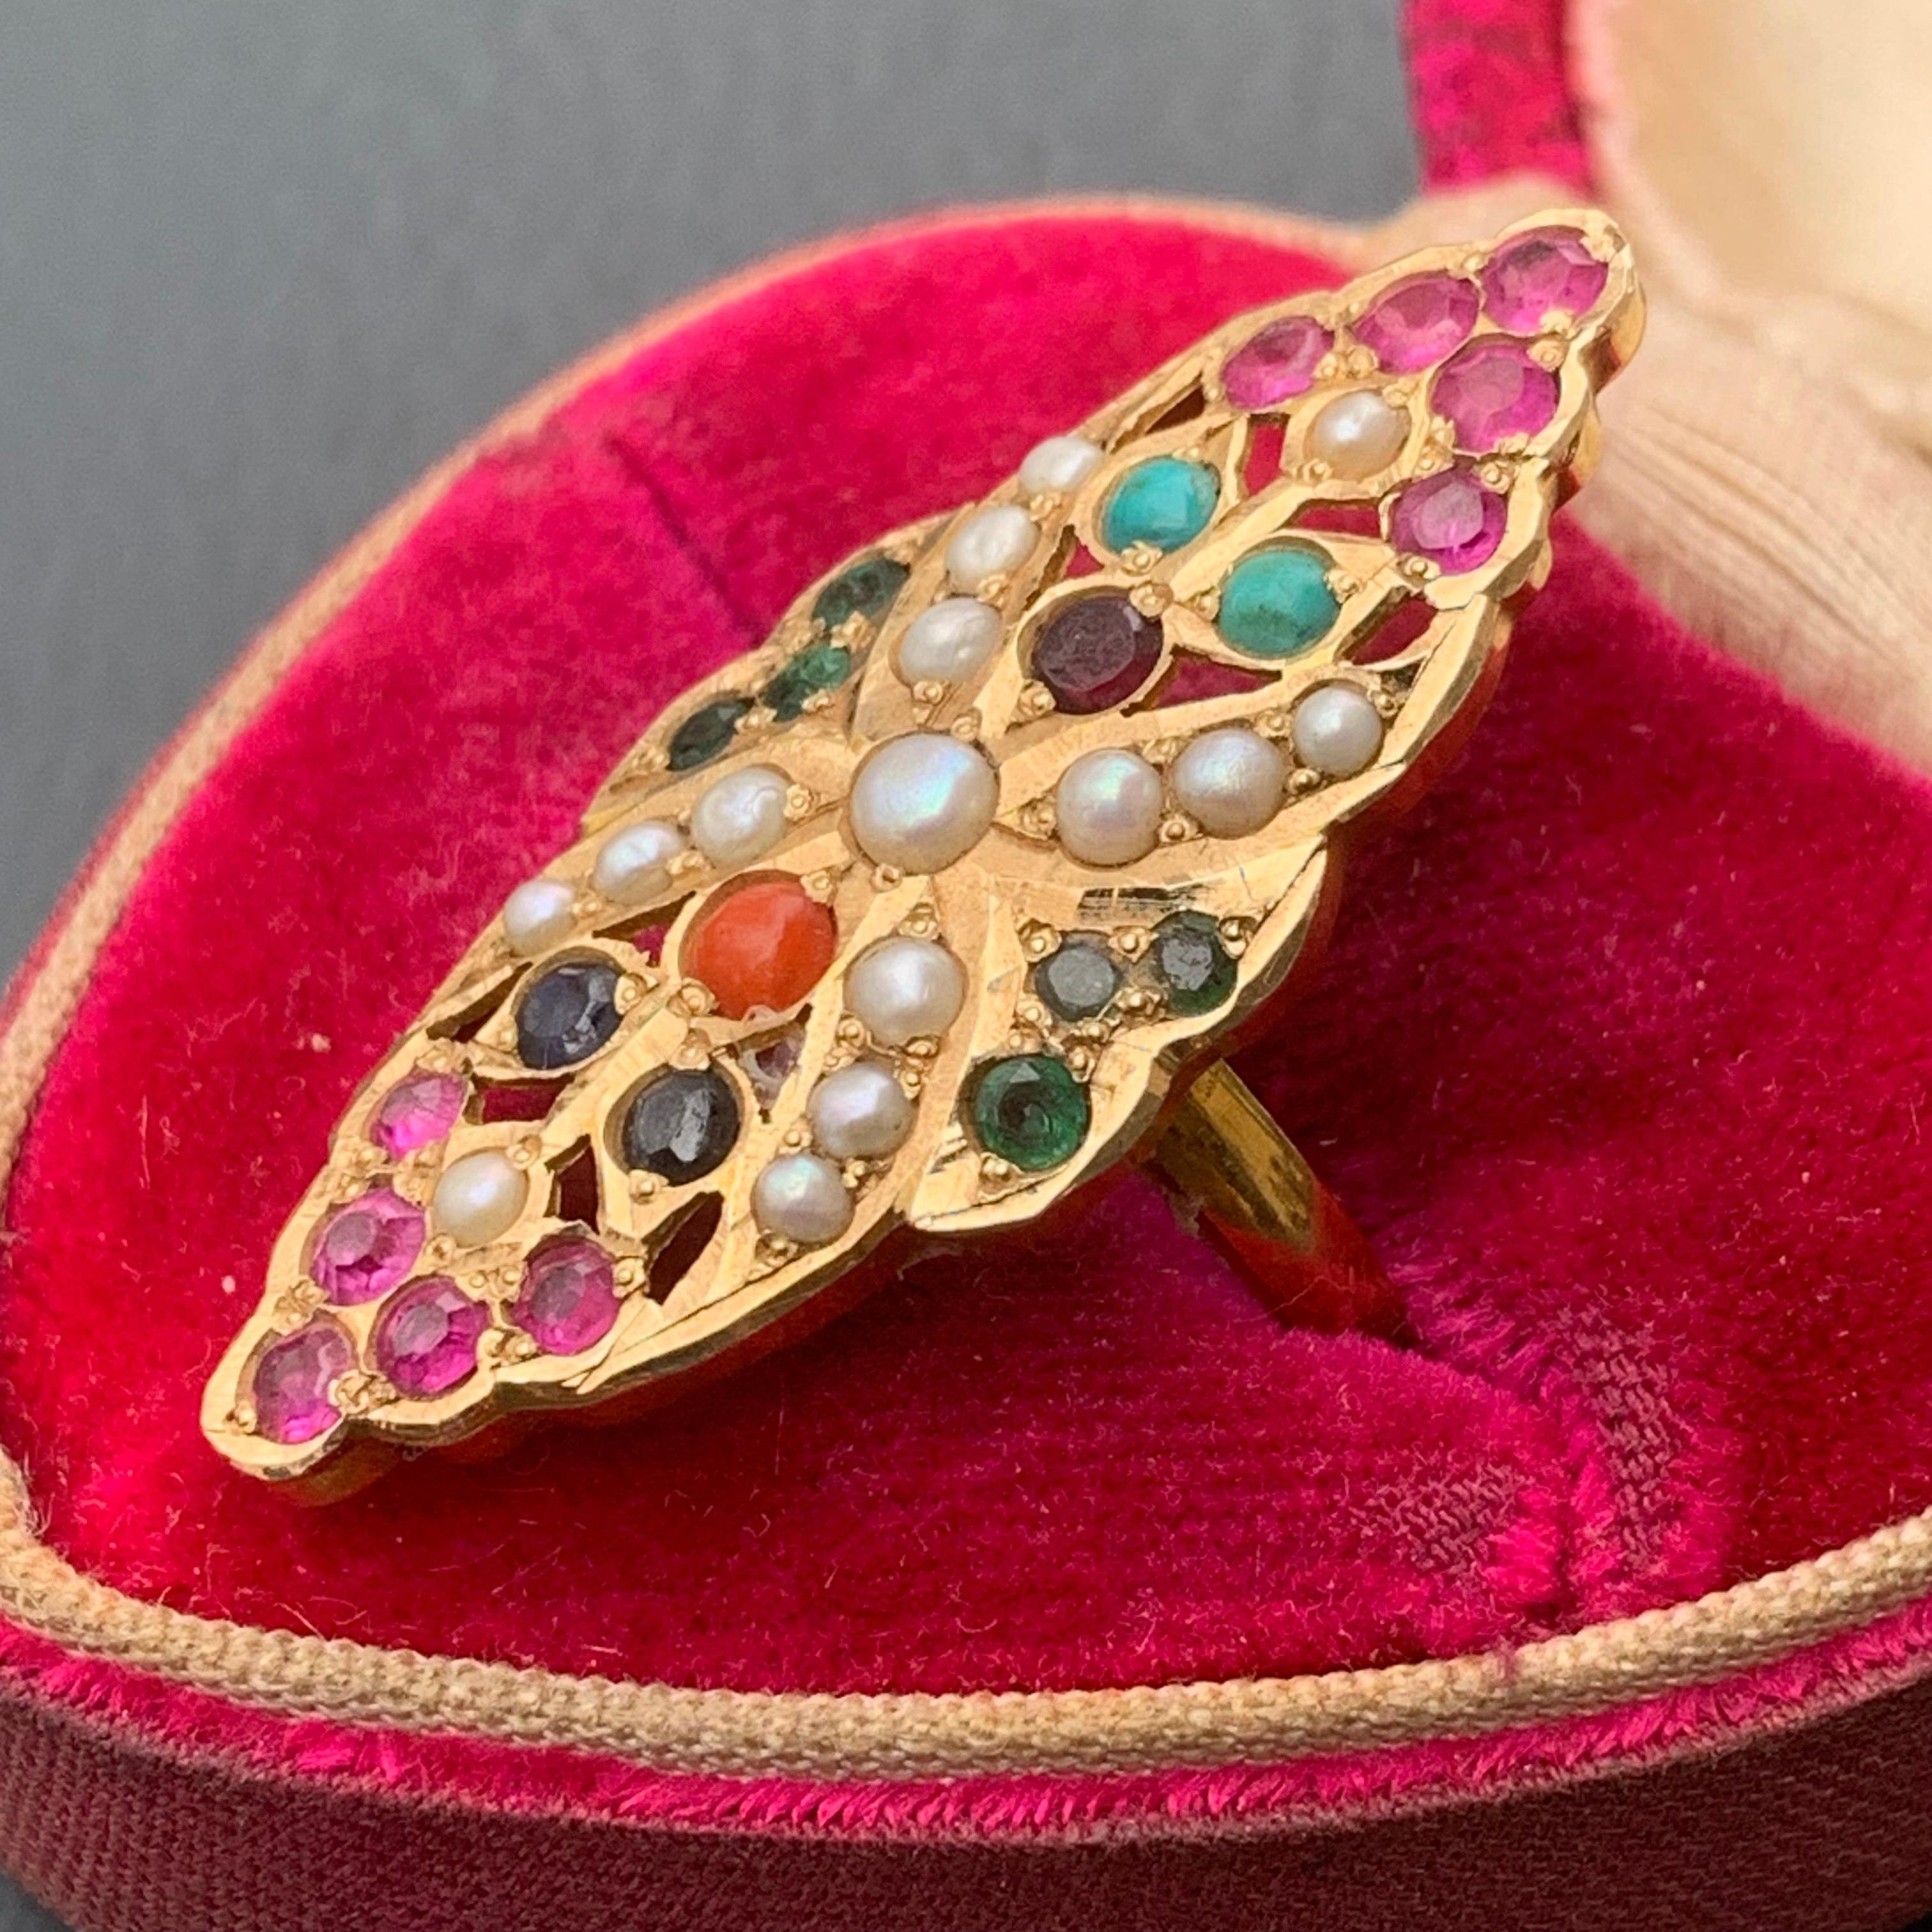 Absolutely stunning vintage handmade 15kt solid gold with gemstone ( turquoise , emeralds , sapphire ,coral ), cultured pearl  cocktail/dinner ring . Ring is handmade in northern part of India most likely Punjab .
Could have been part of wedding